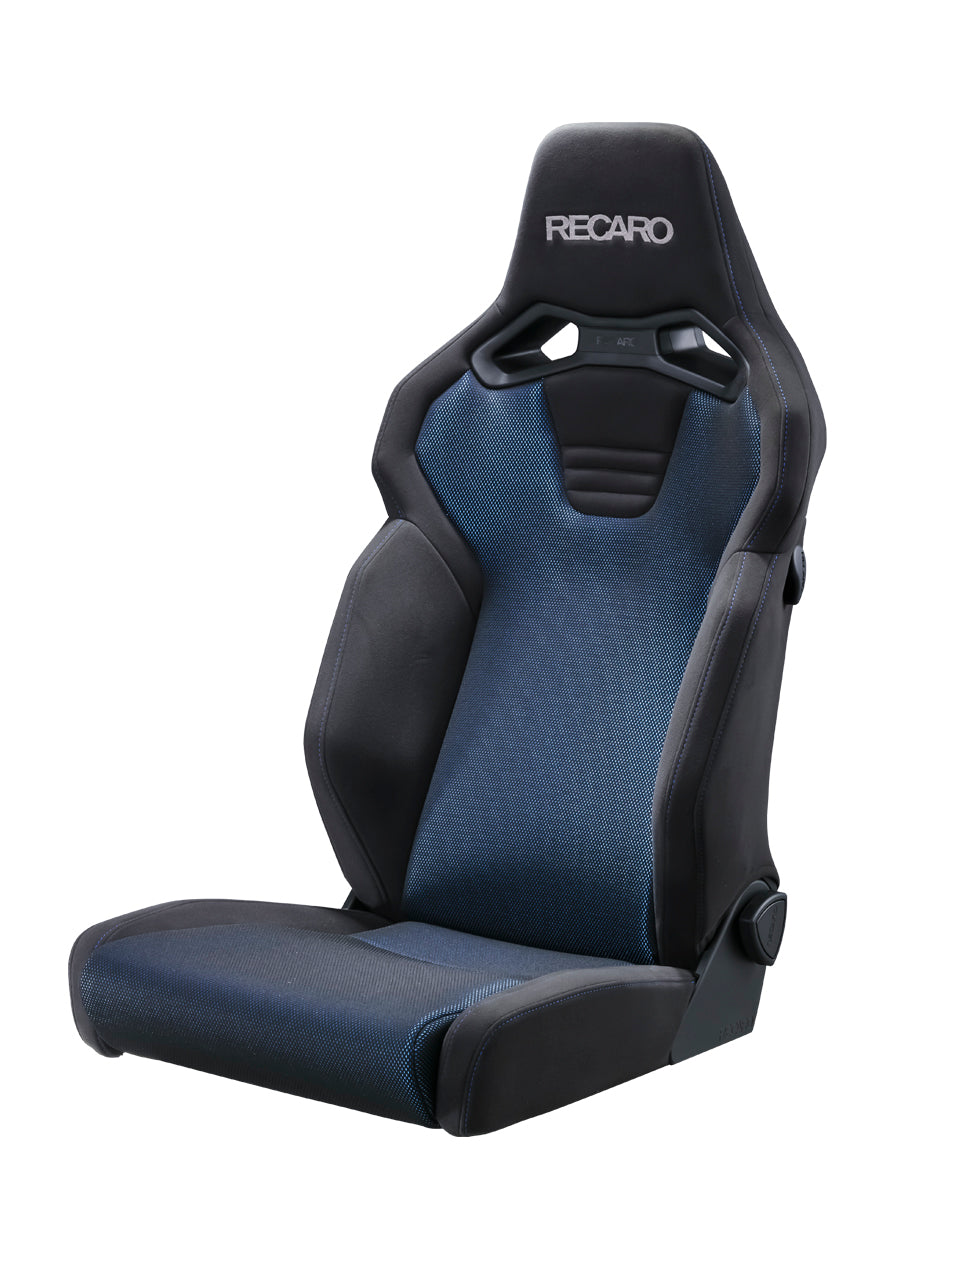 RECARO SR-C BK100H A R BL BK BRILLIANT MESH BLUE AND KAMUI BLACK COLOR SEAT ARMREST ATTACHEBLE WITH HEATED SEATS FOR  81-121.29.643-0